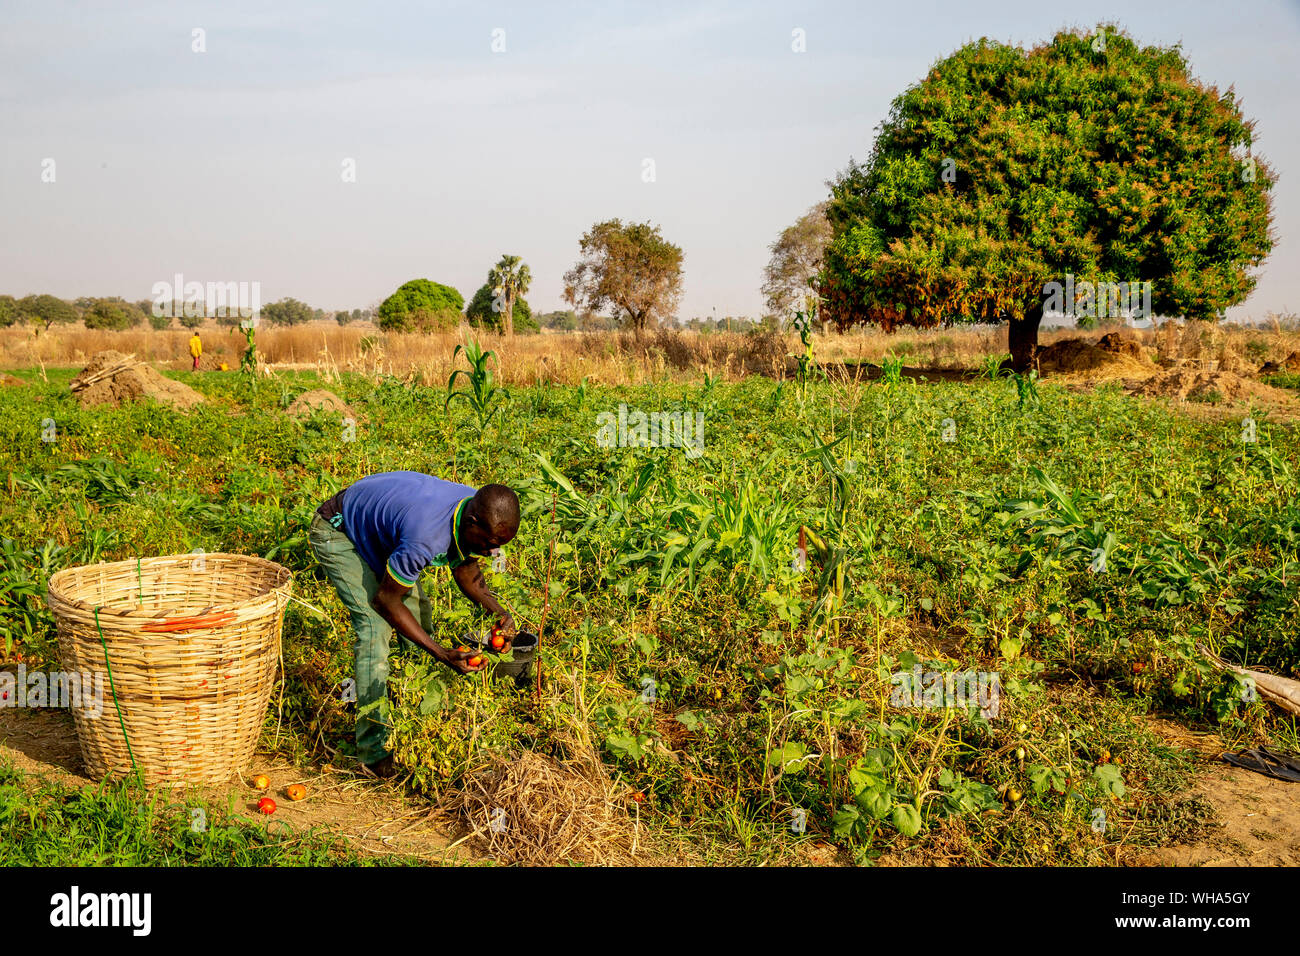 Microfinance client harvesting tomatoes in Namong, Tone district, Togo, West Africa, Africa Stock Photo